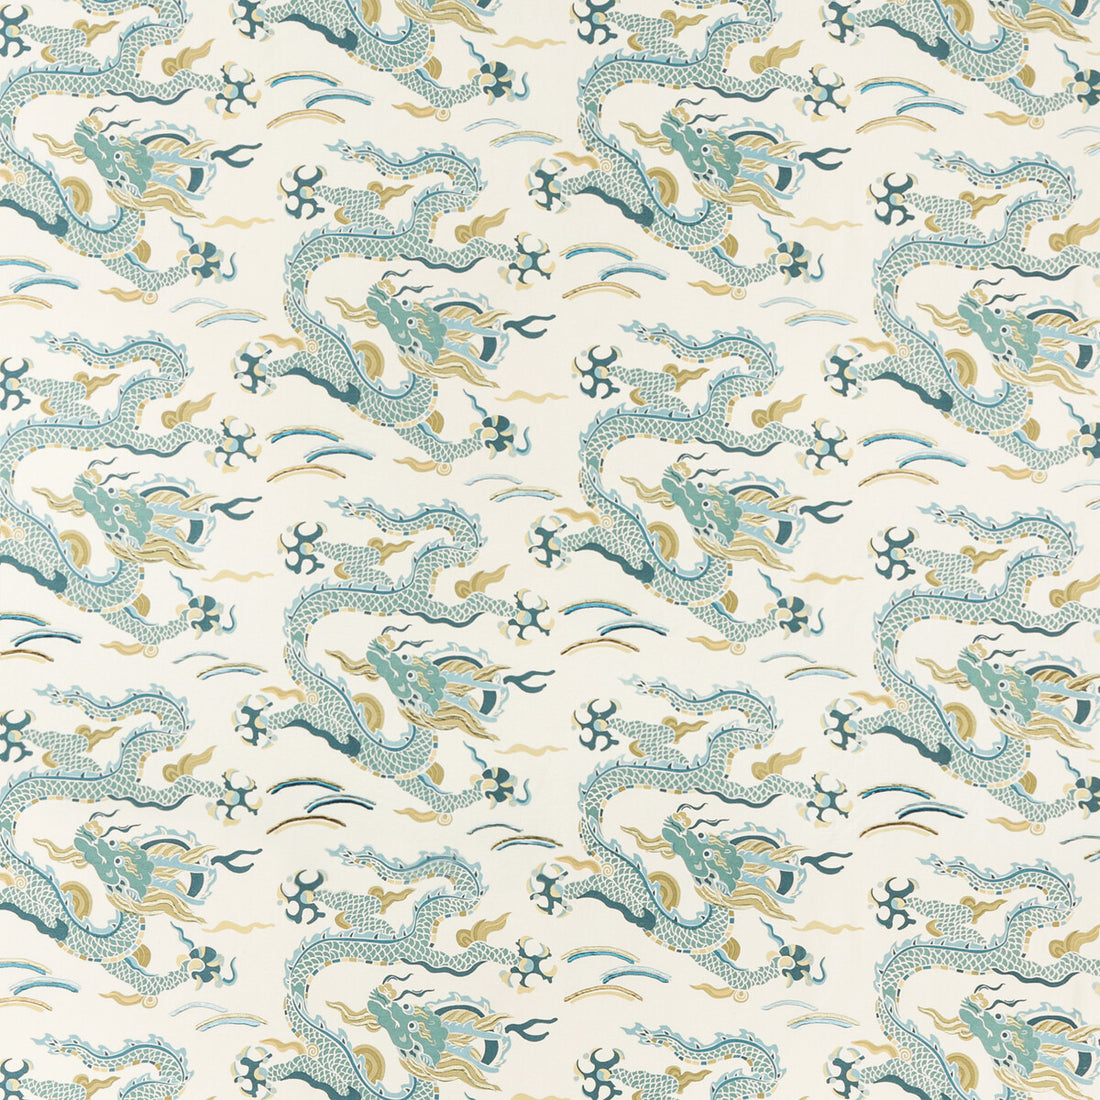 Zen Dragon fabric in chambray color - pattern ZEN DRAGON.135.0 - by Kravet Couture